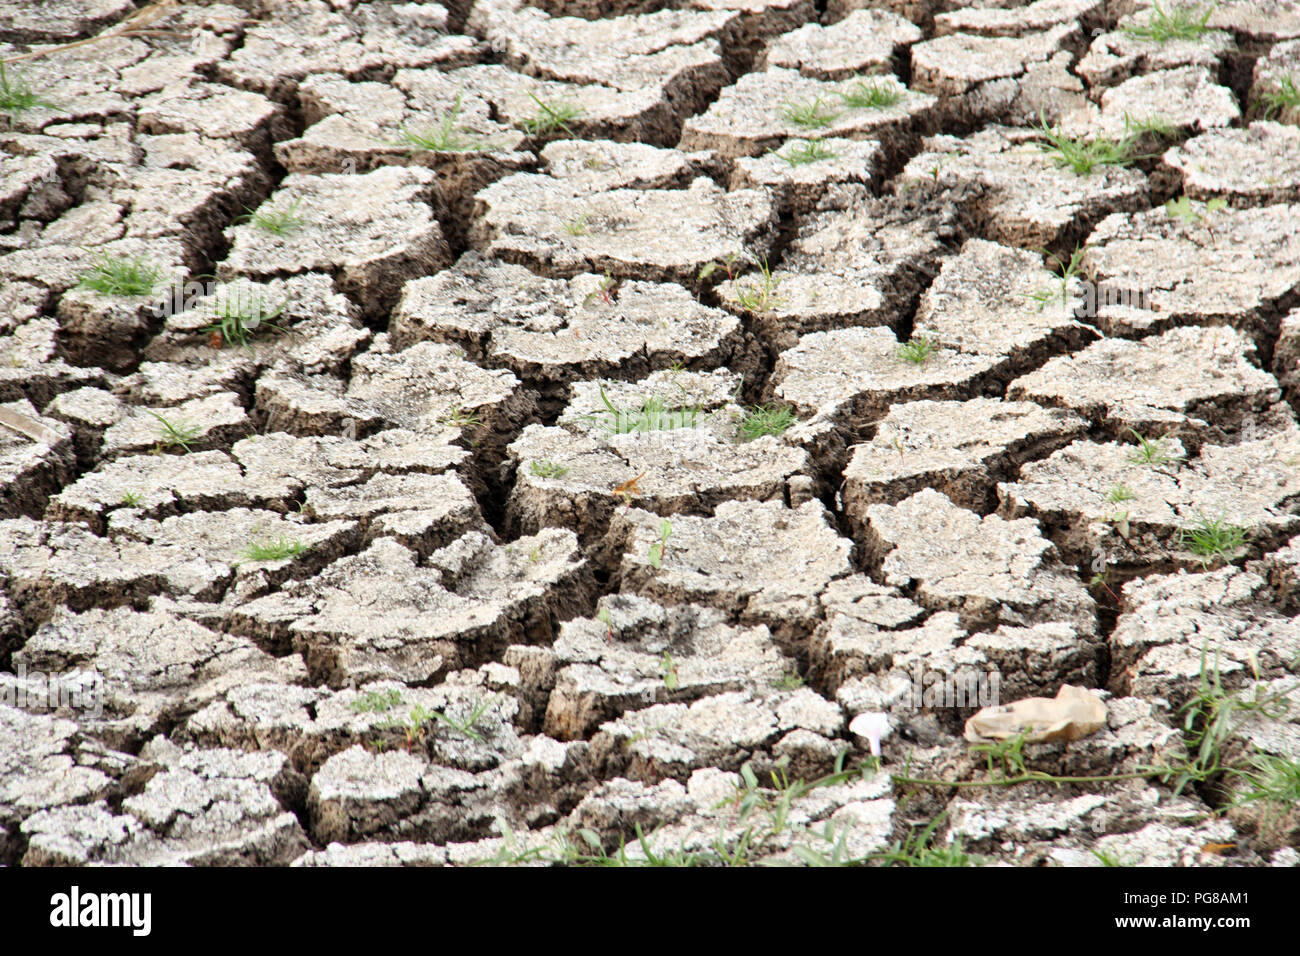 Dry and cracked soil drying out in a severe drought Stock Photo